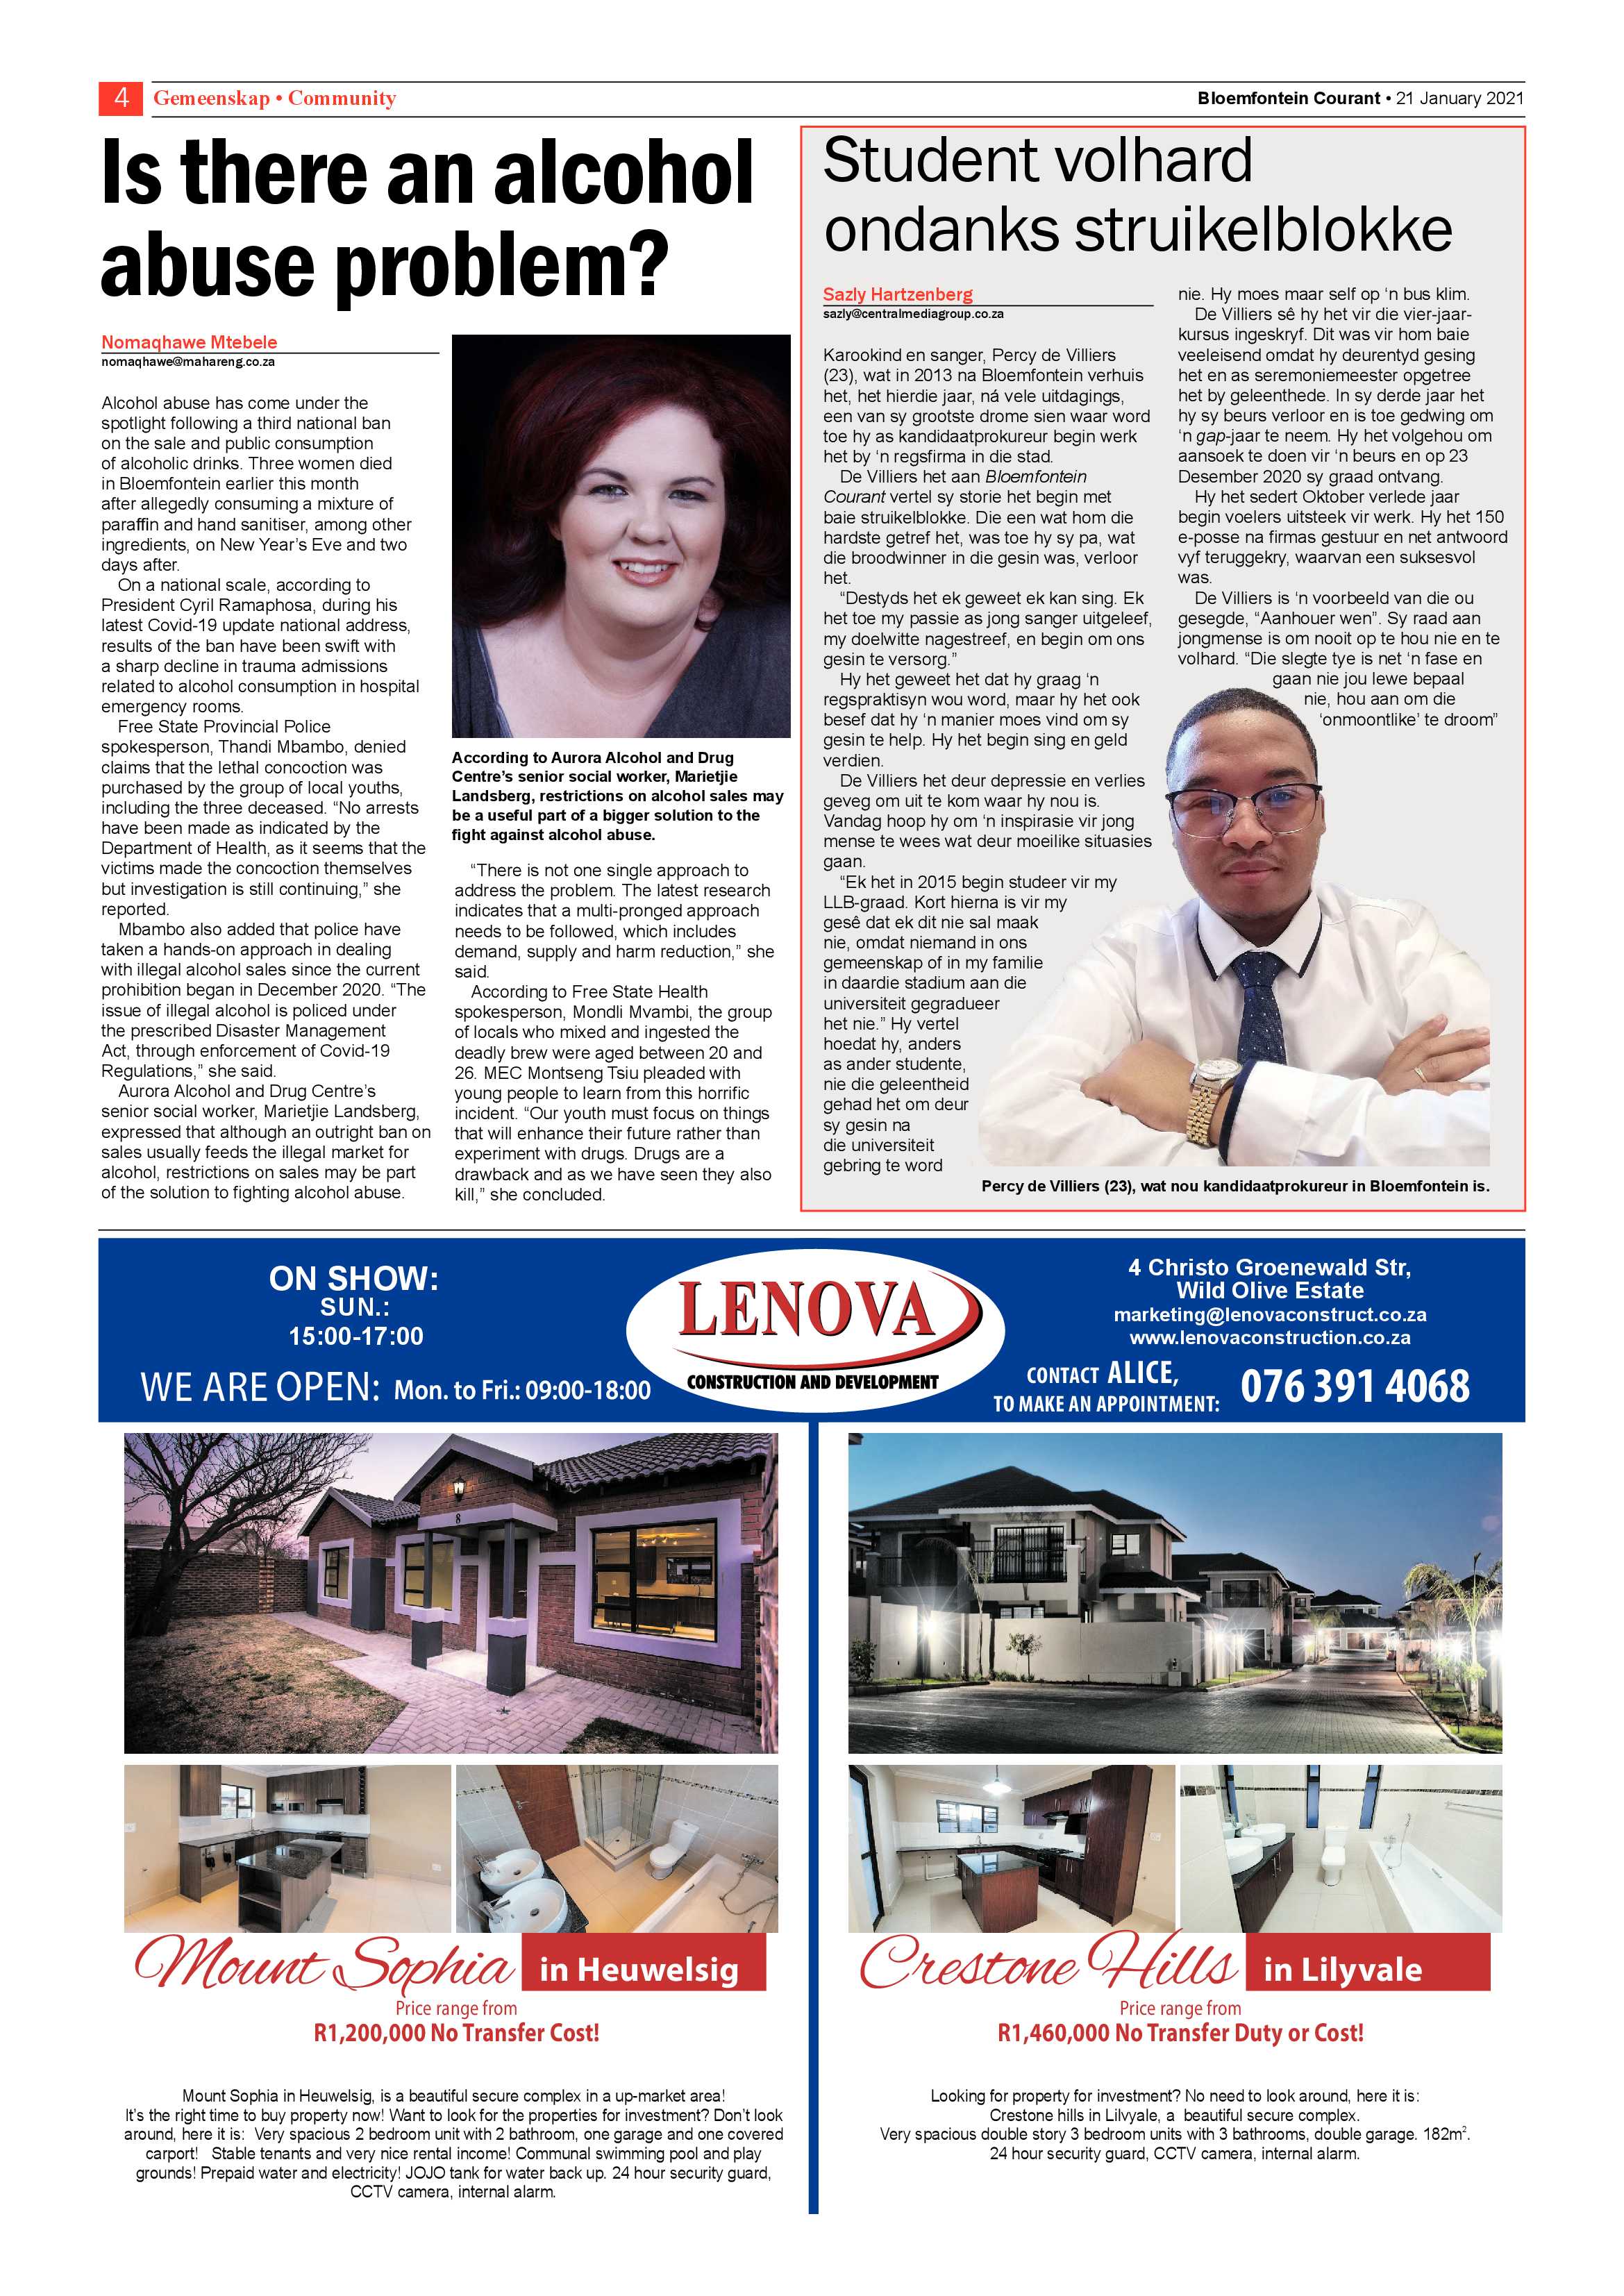 https-bloemfonteincourant-epaper-products-caxton-co-za-wp-content-ftp-epaper_uploads-86-bloemfontein_courant_21_january_2021-bloemfontein_courant_21_january_2021-5-pdfpg12-epapers-page-4